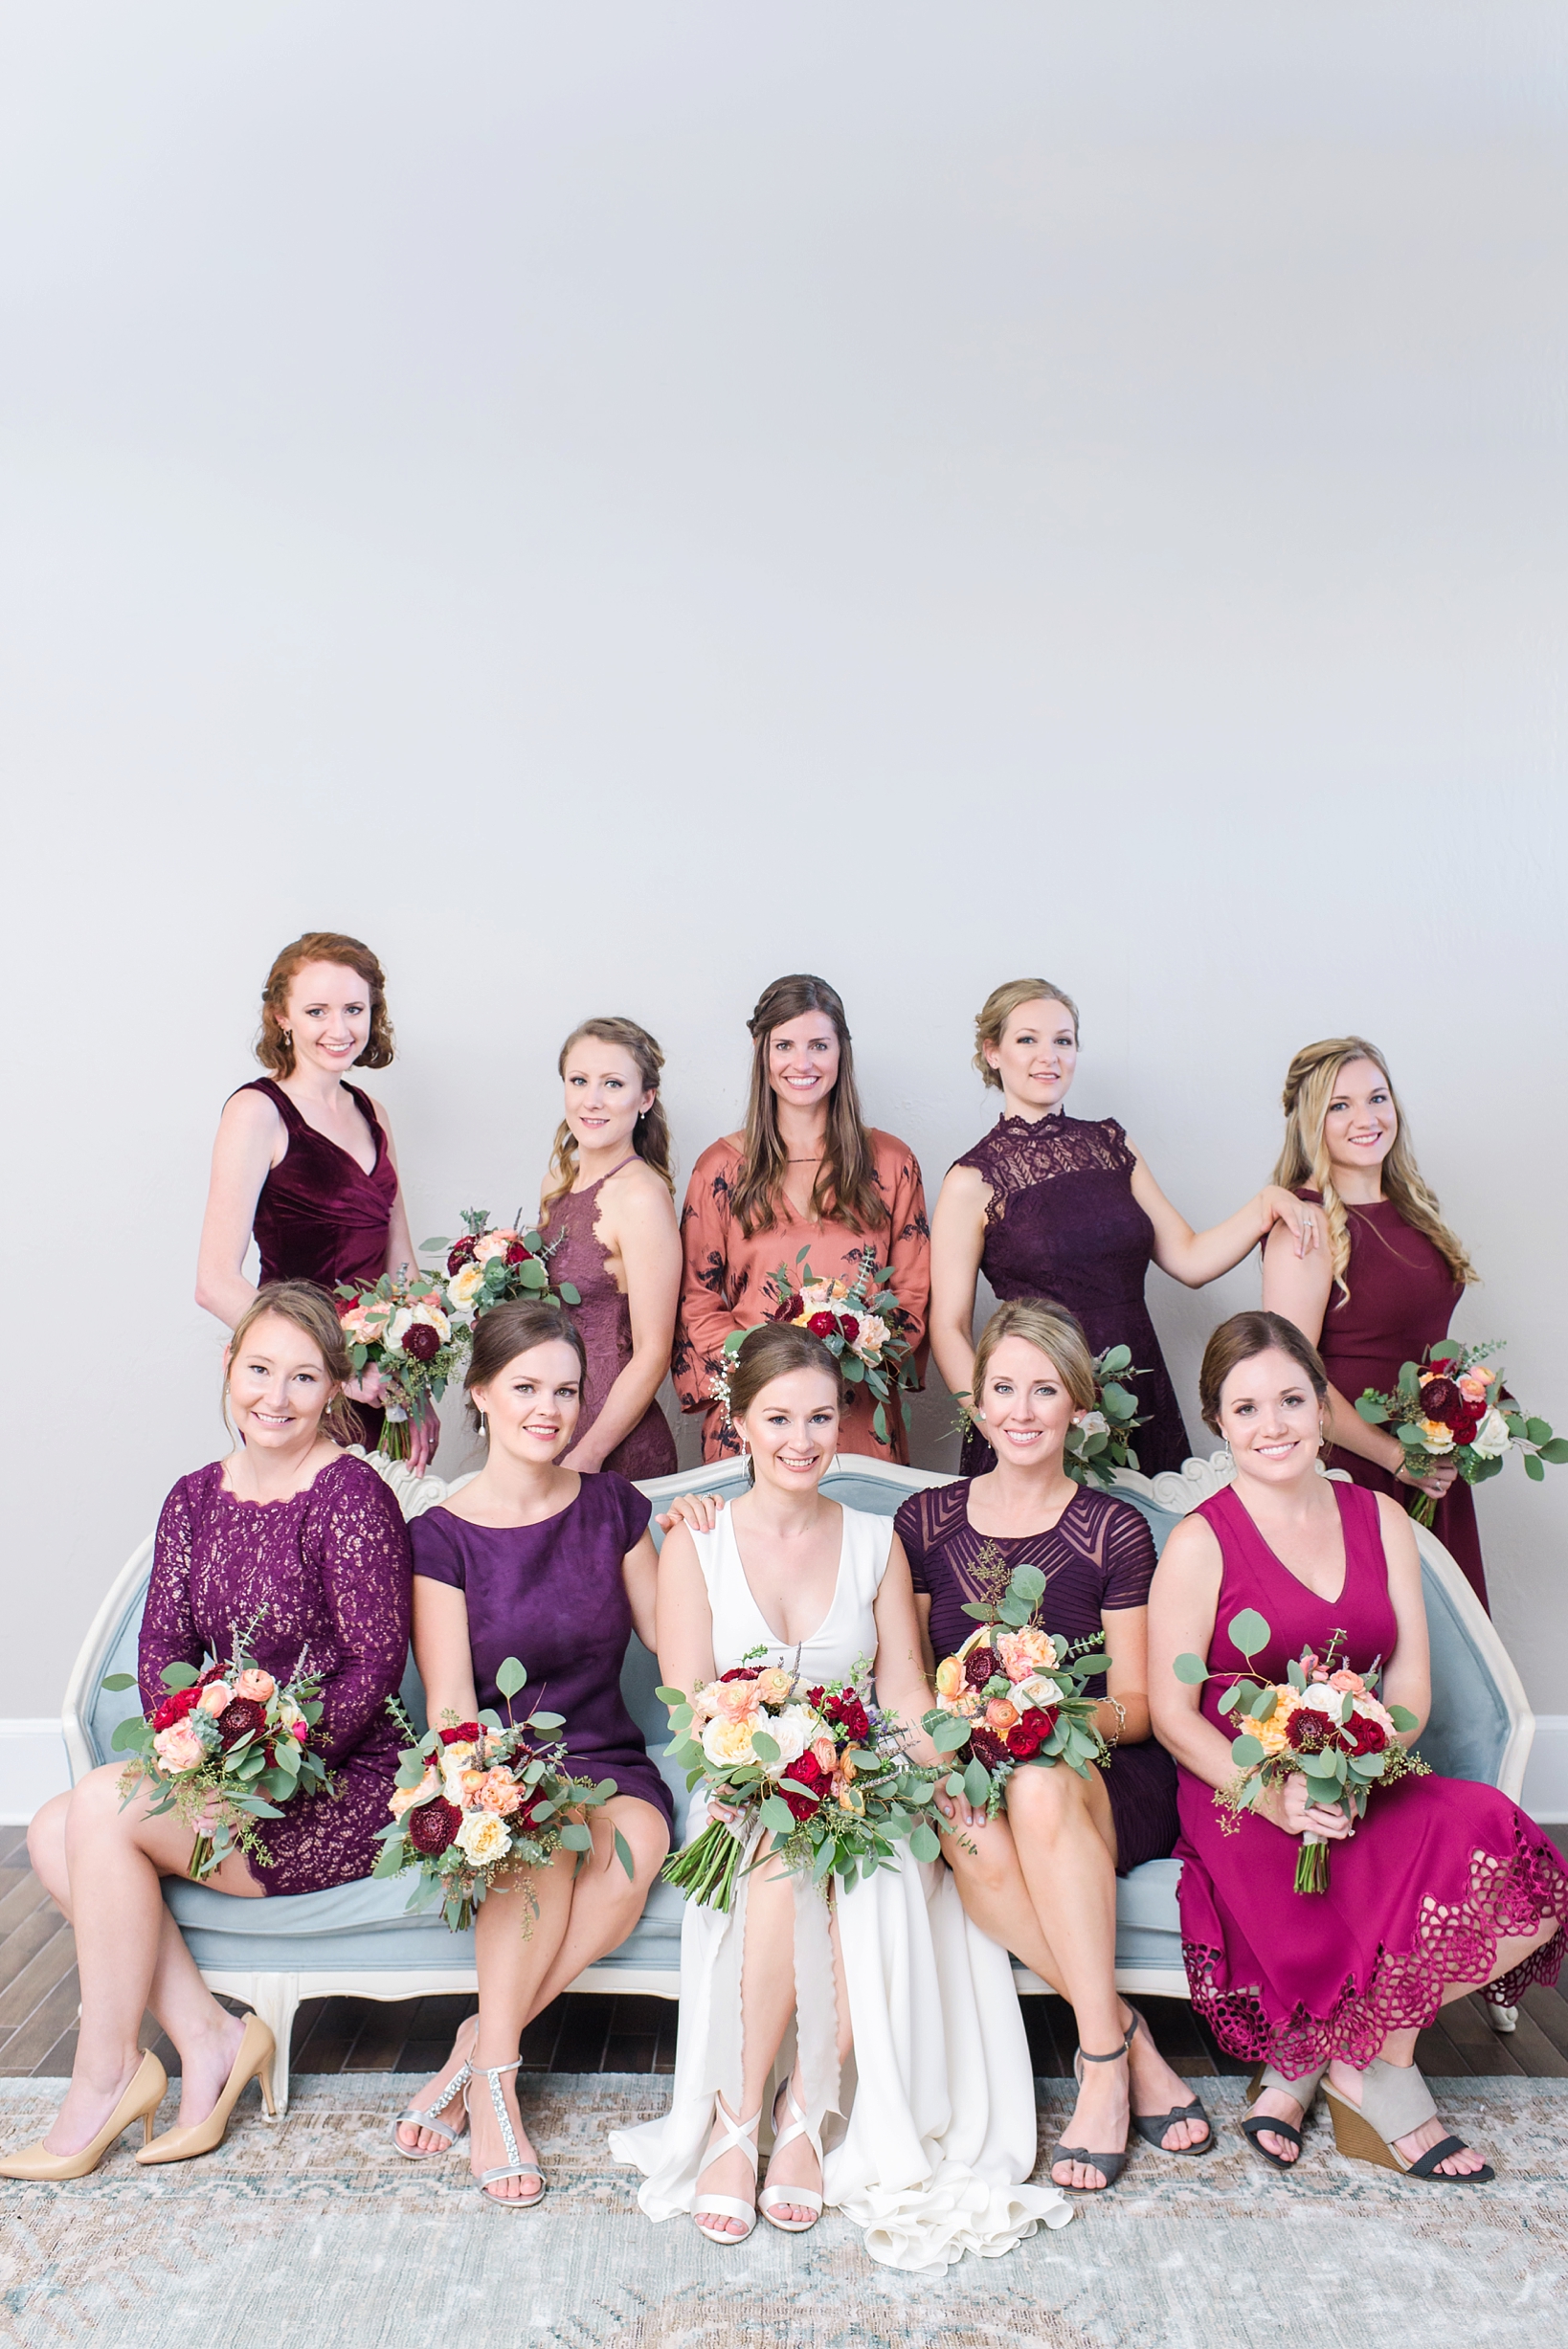 Formal picture of the bride and her bridesmaids seated